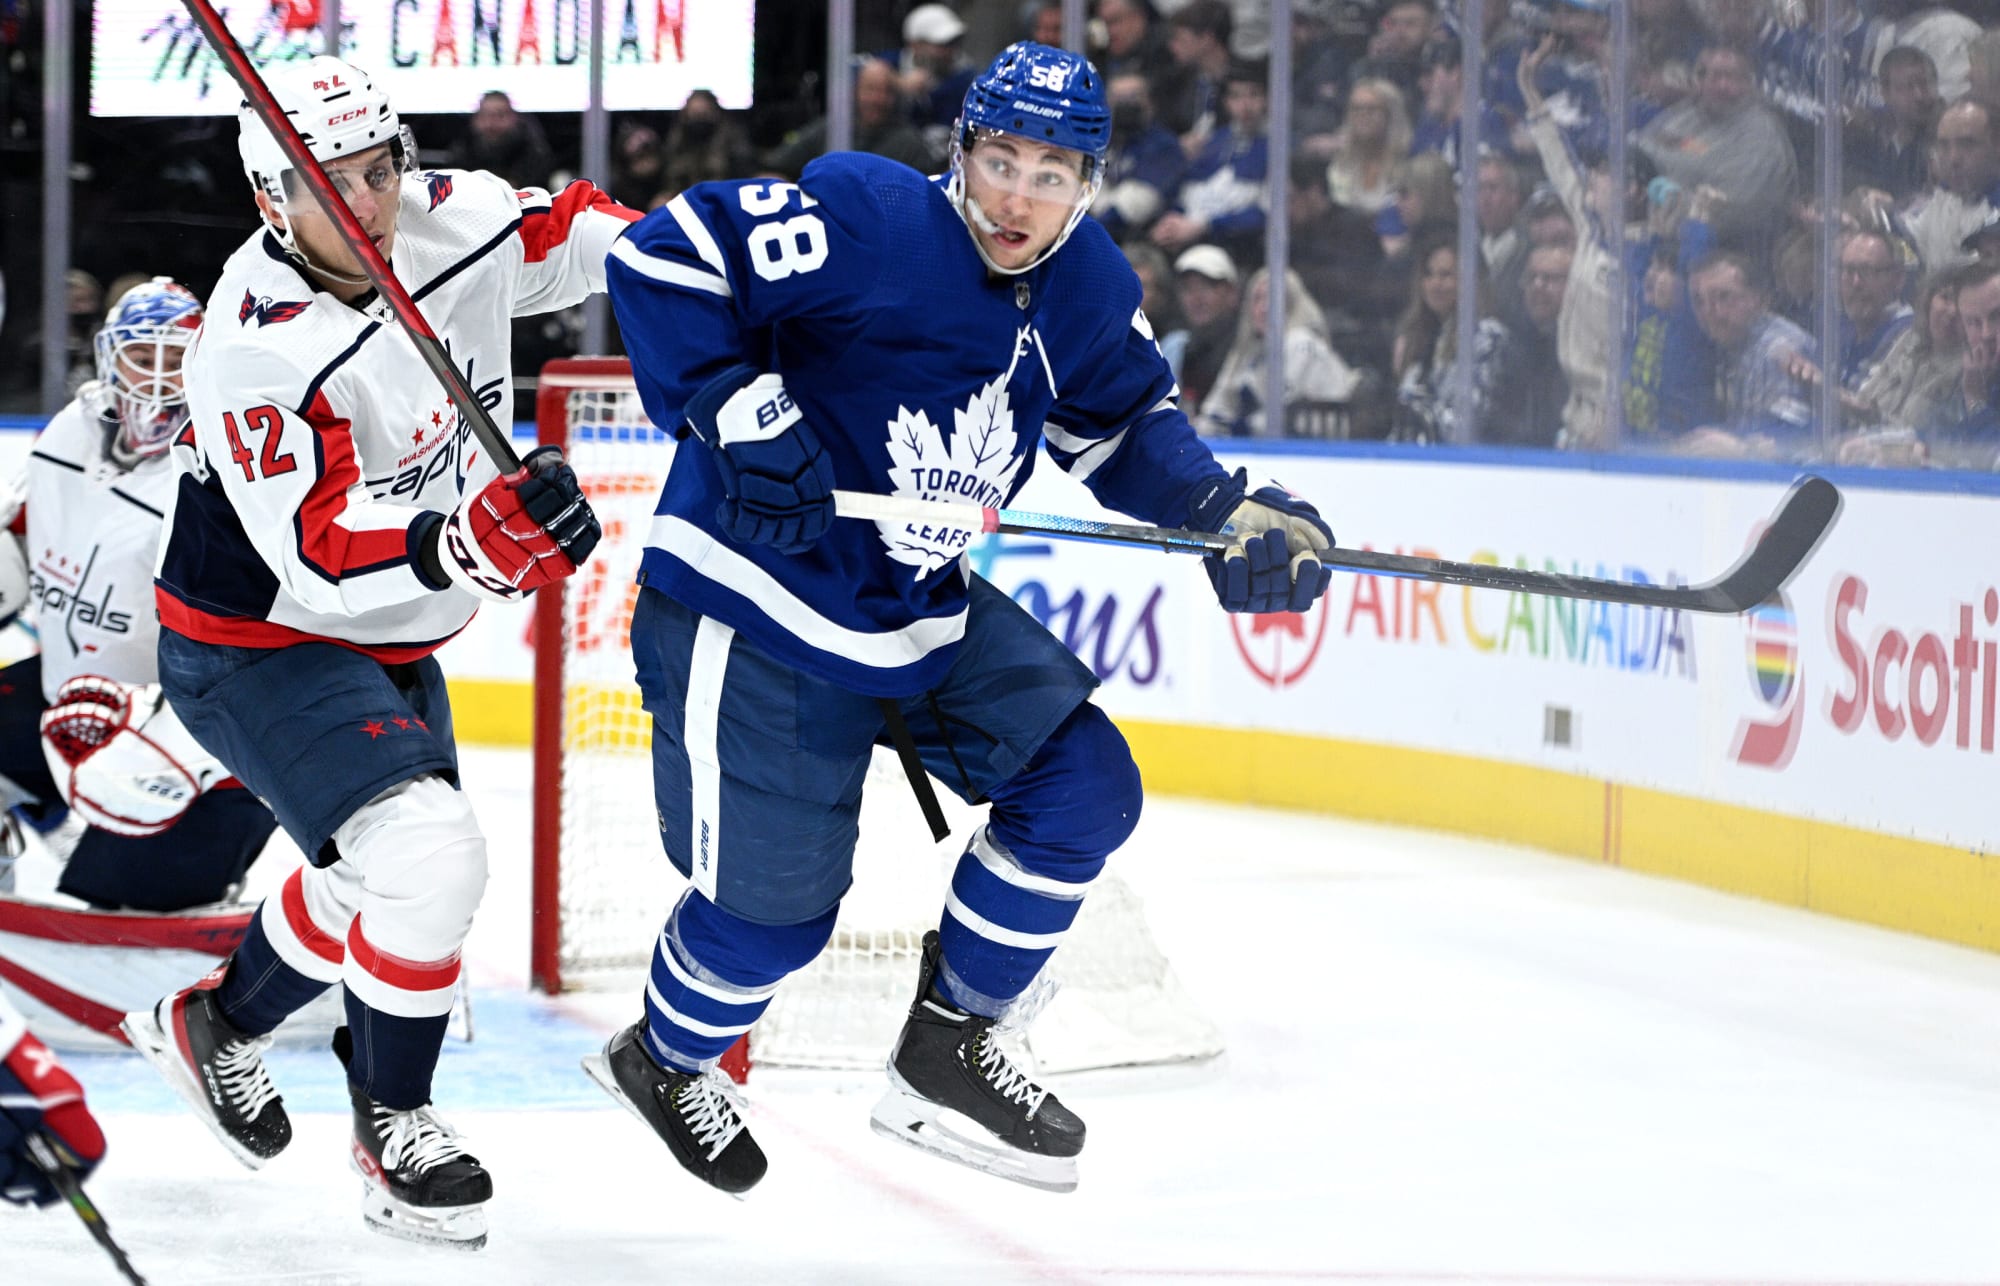 A Toronto Maple Leafs Fan Site - News, Blogs, Opinion and More